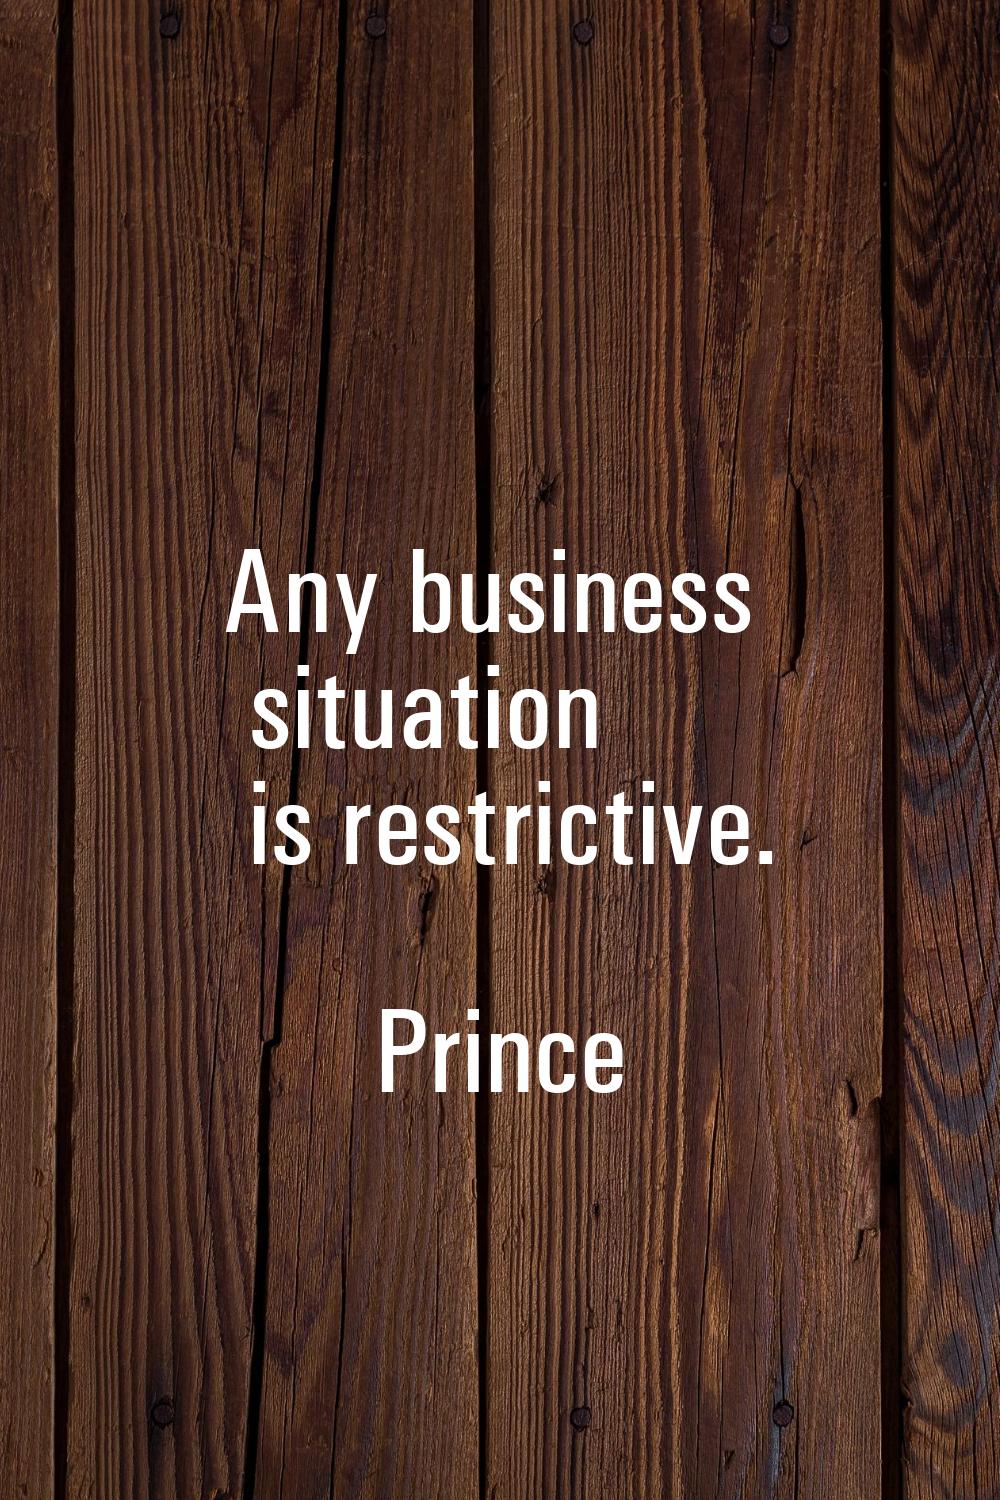 Any business situation is restrictive.